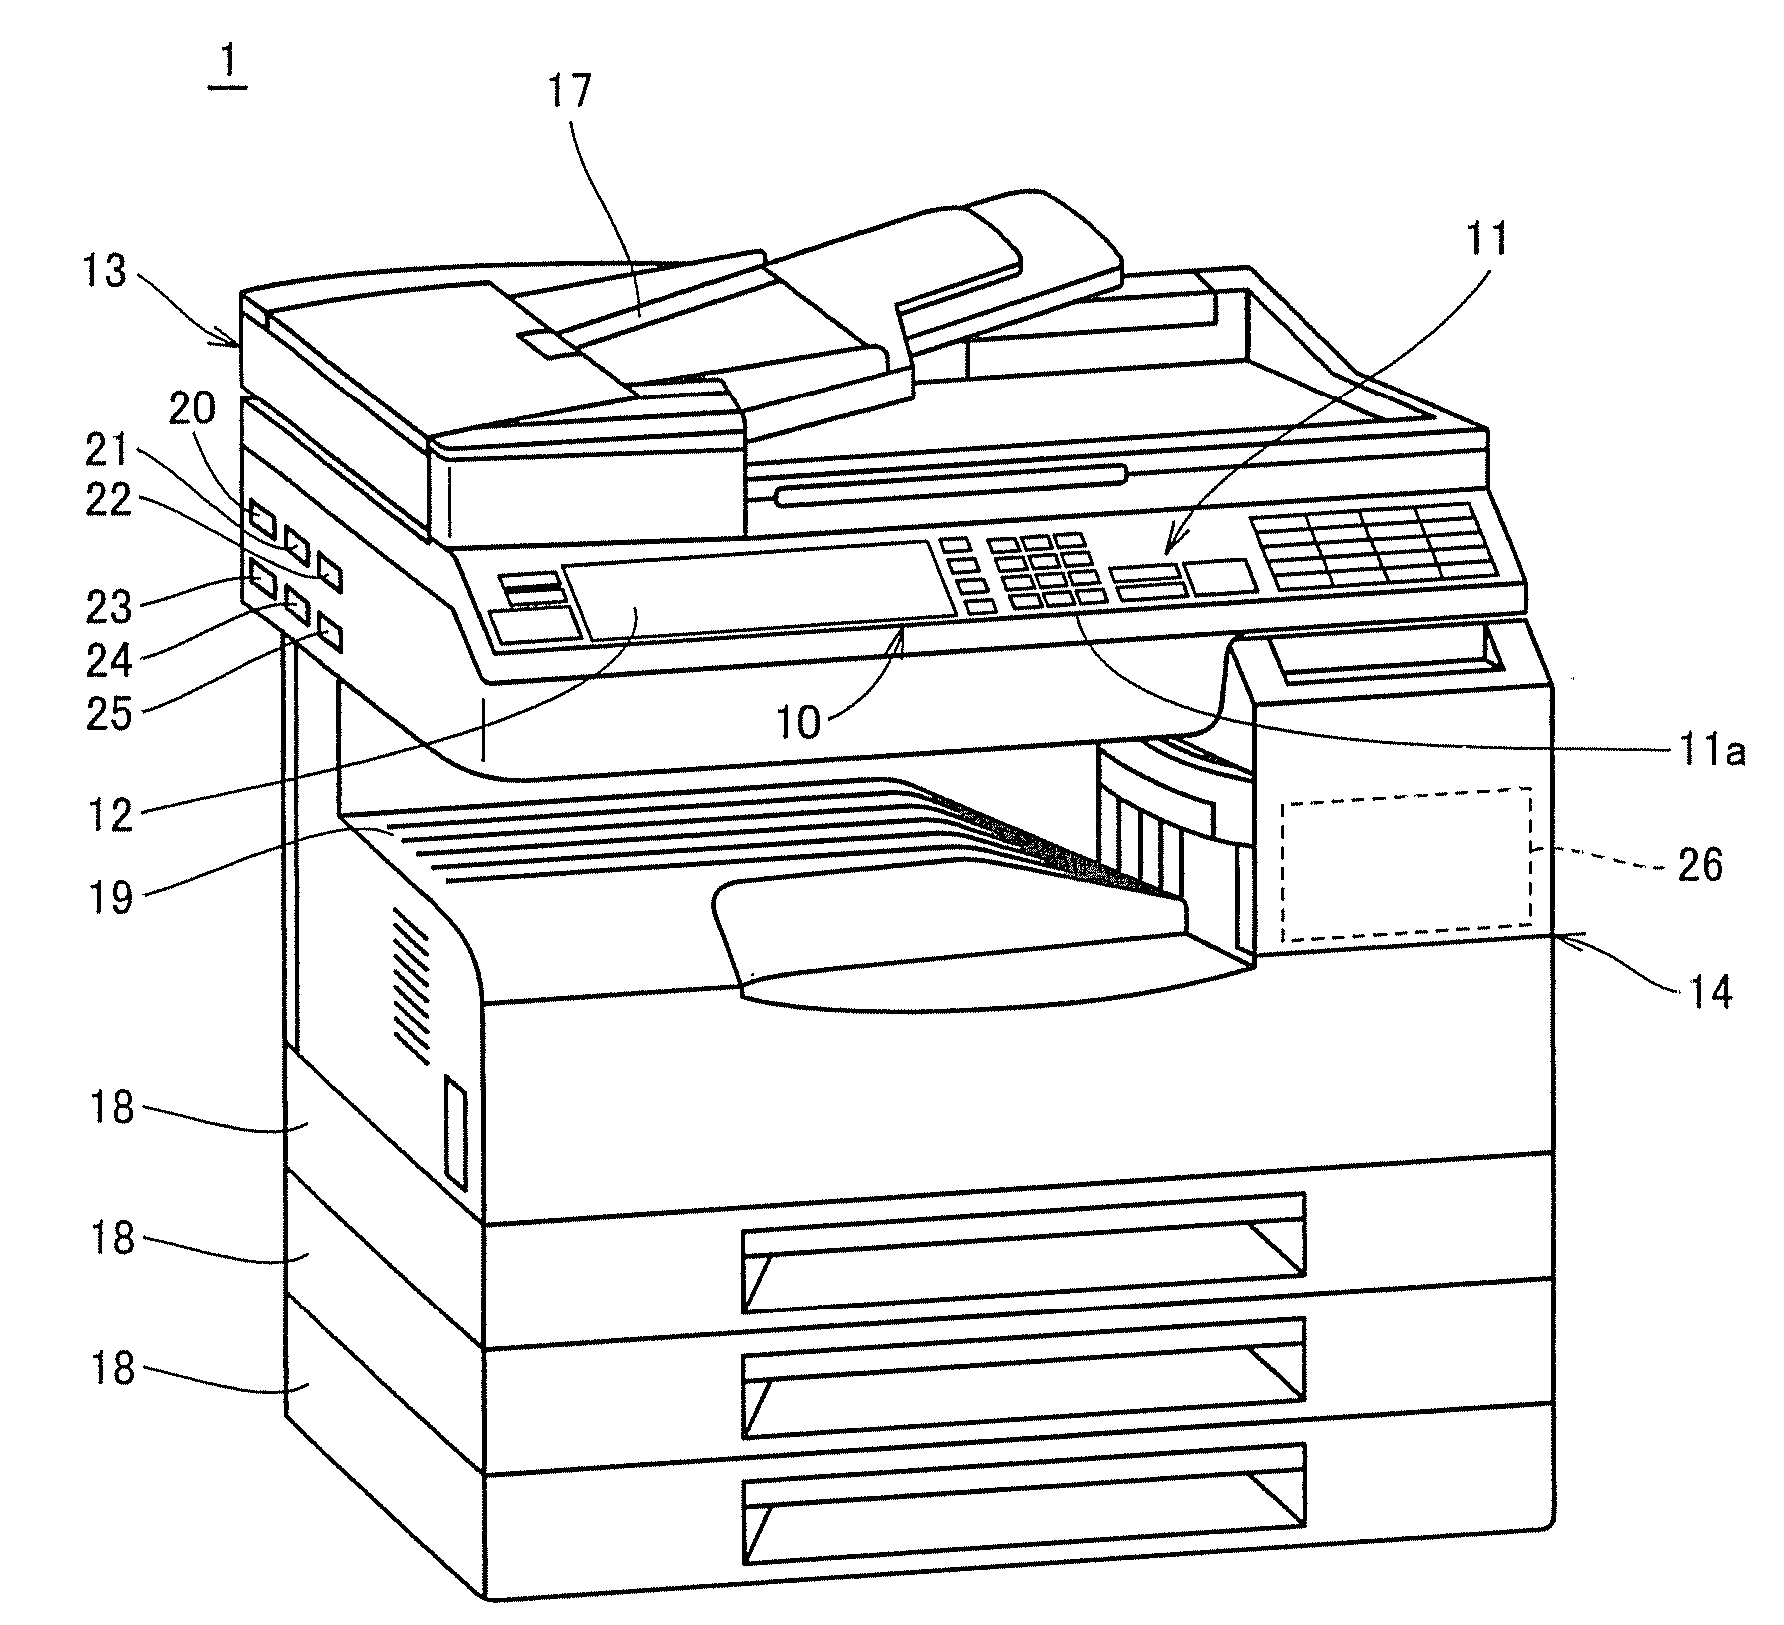 Image forming apparatus capable of efficiently and effectively using USB connector